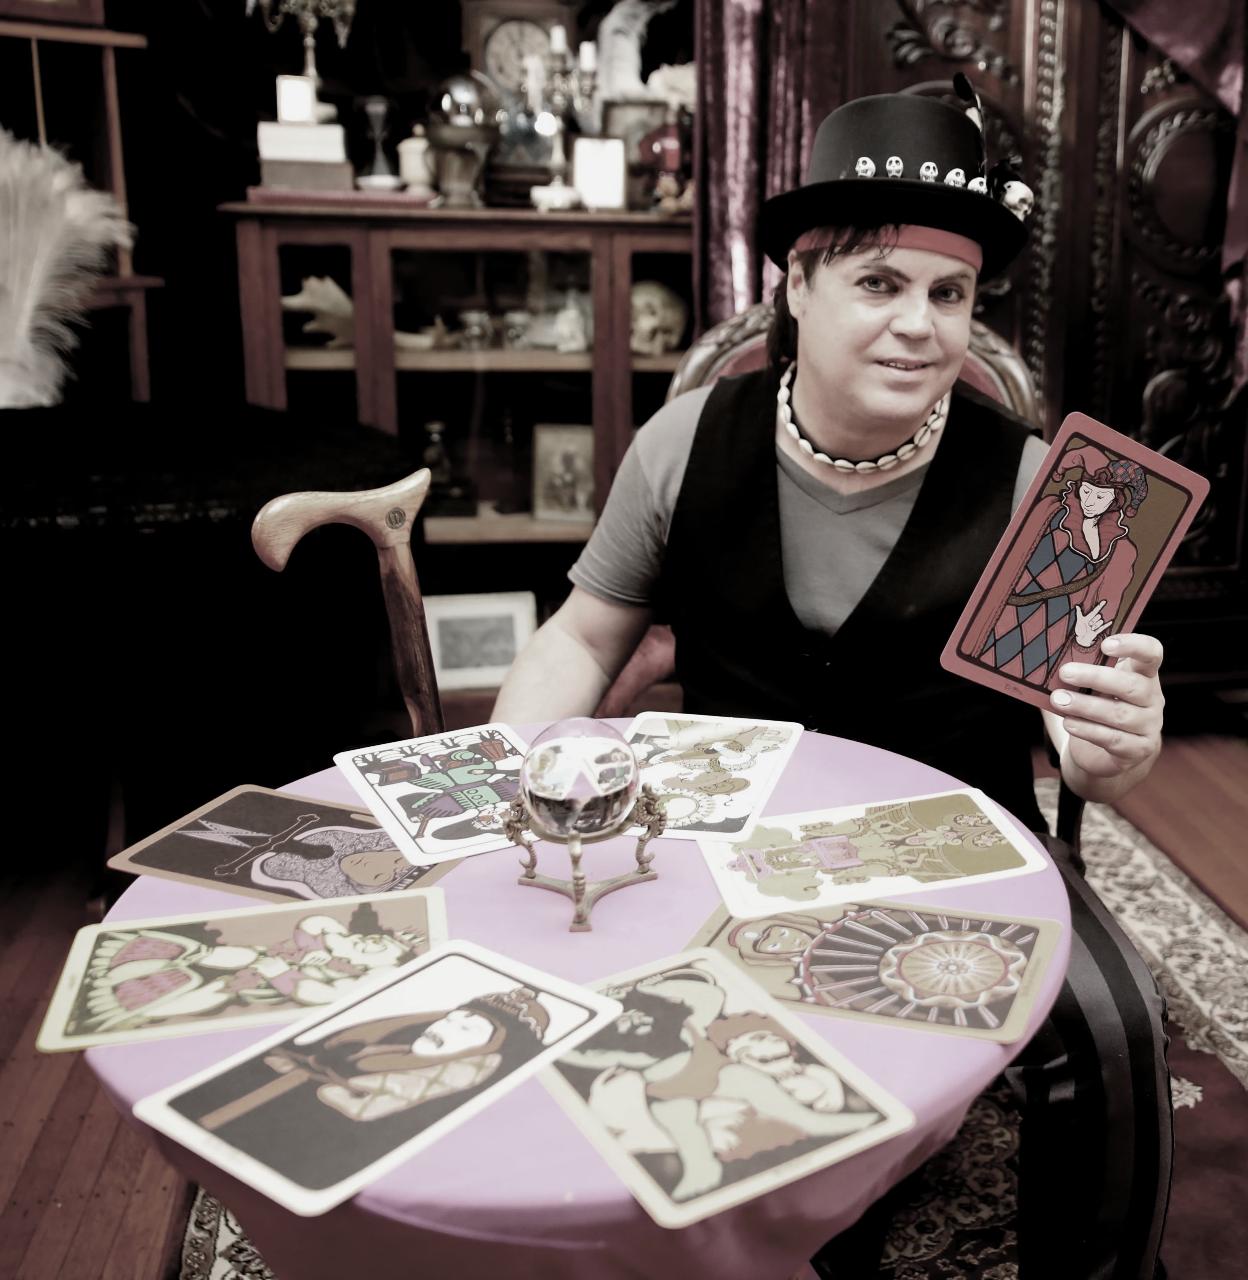 Name of Top Affiliate Presents: Dok Lazlo's Modern Alchemy Tarot Party + Free Haunted French Quarter Walking Tour !